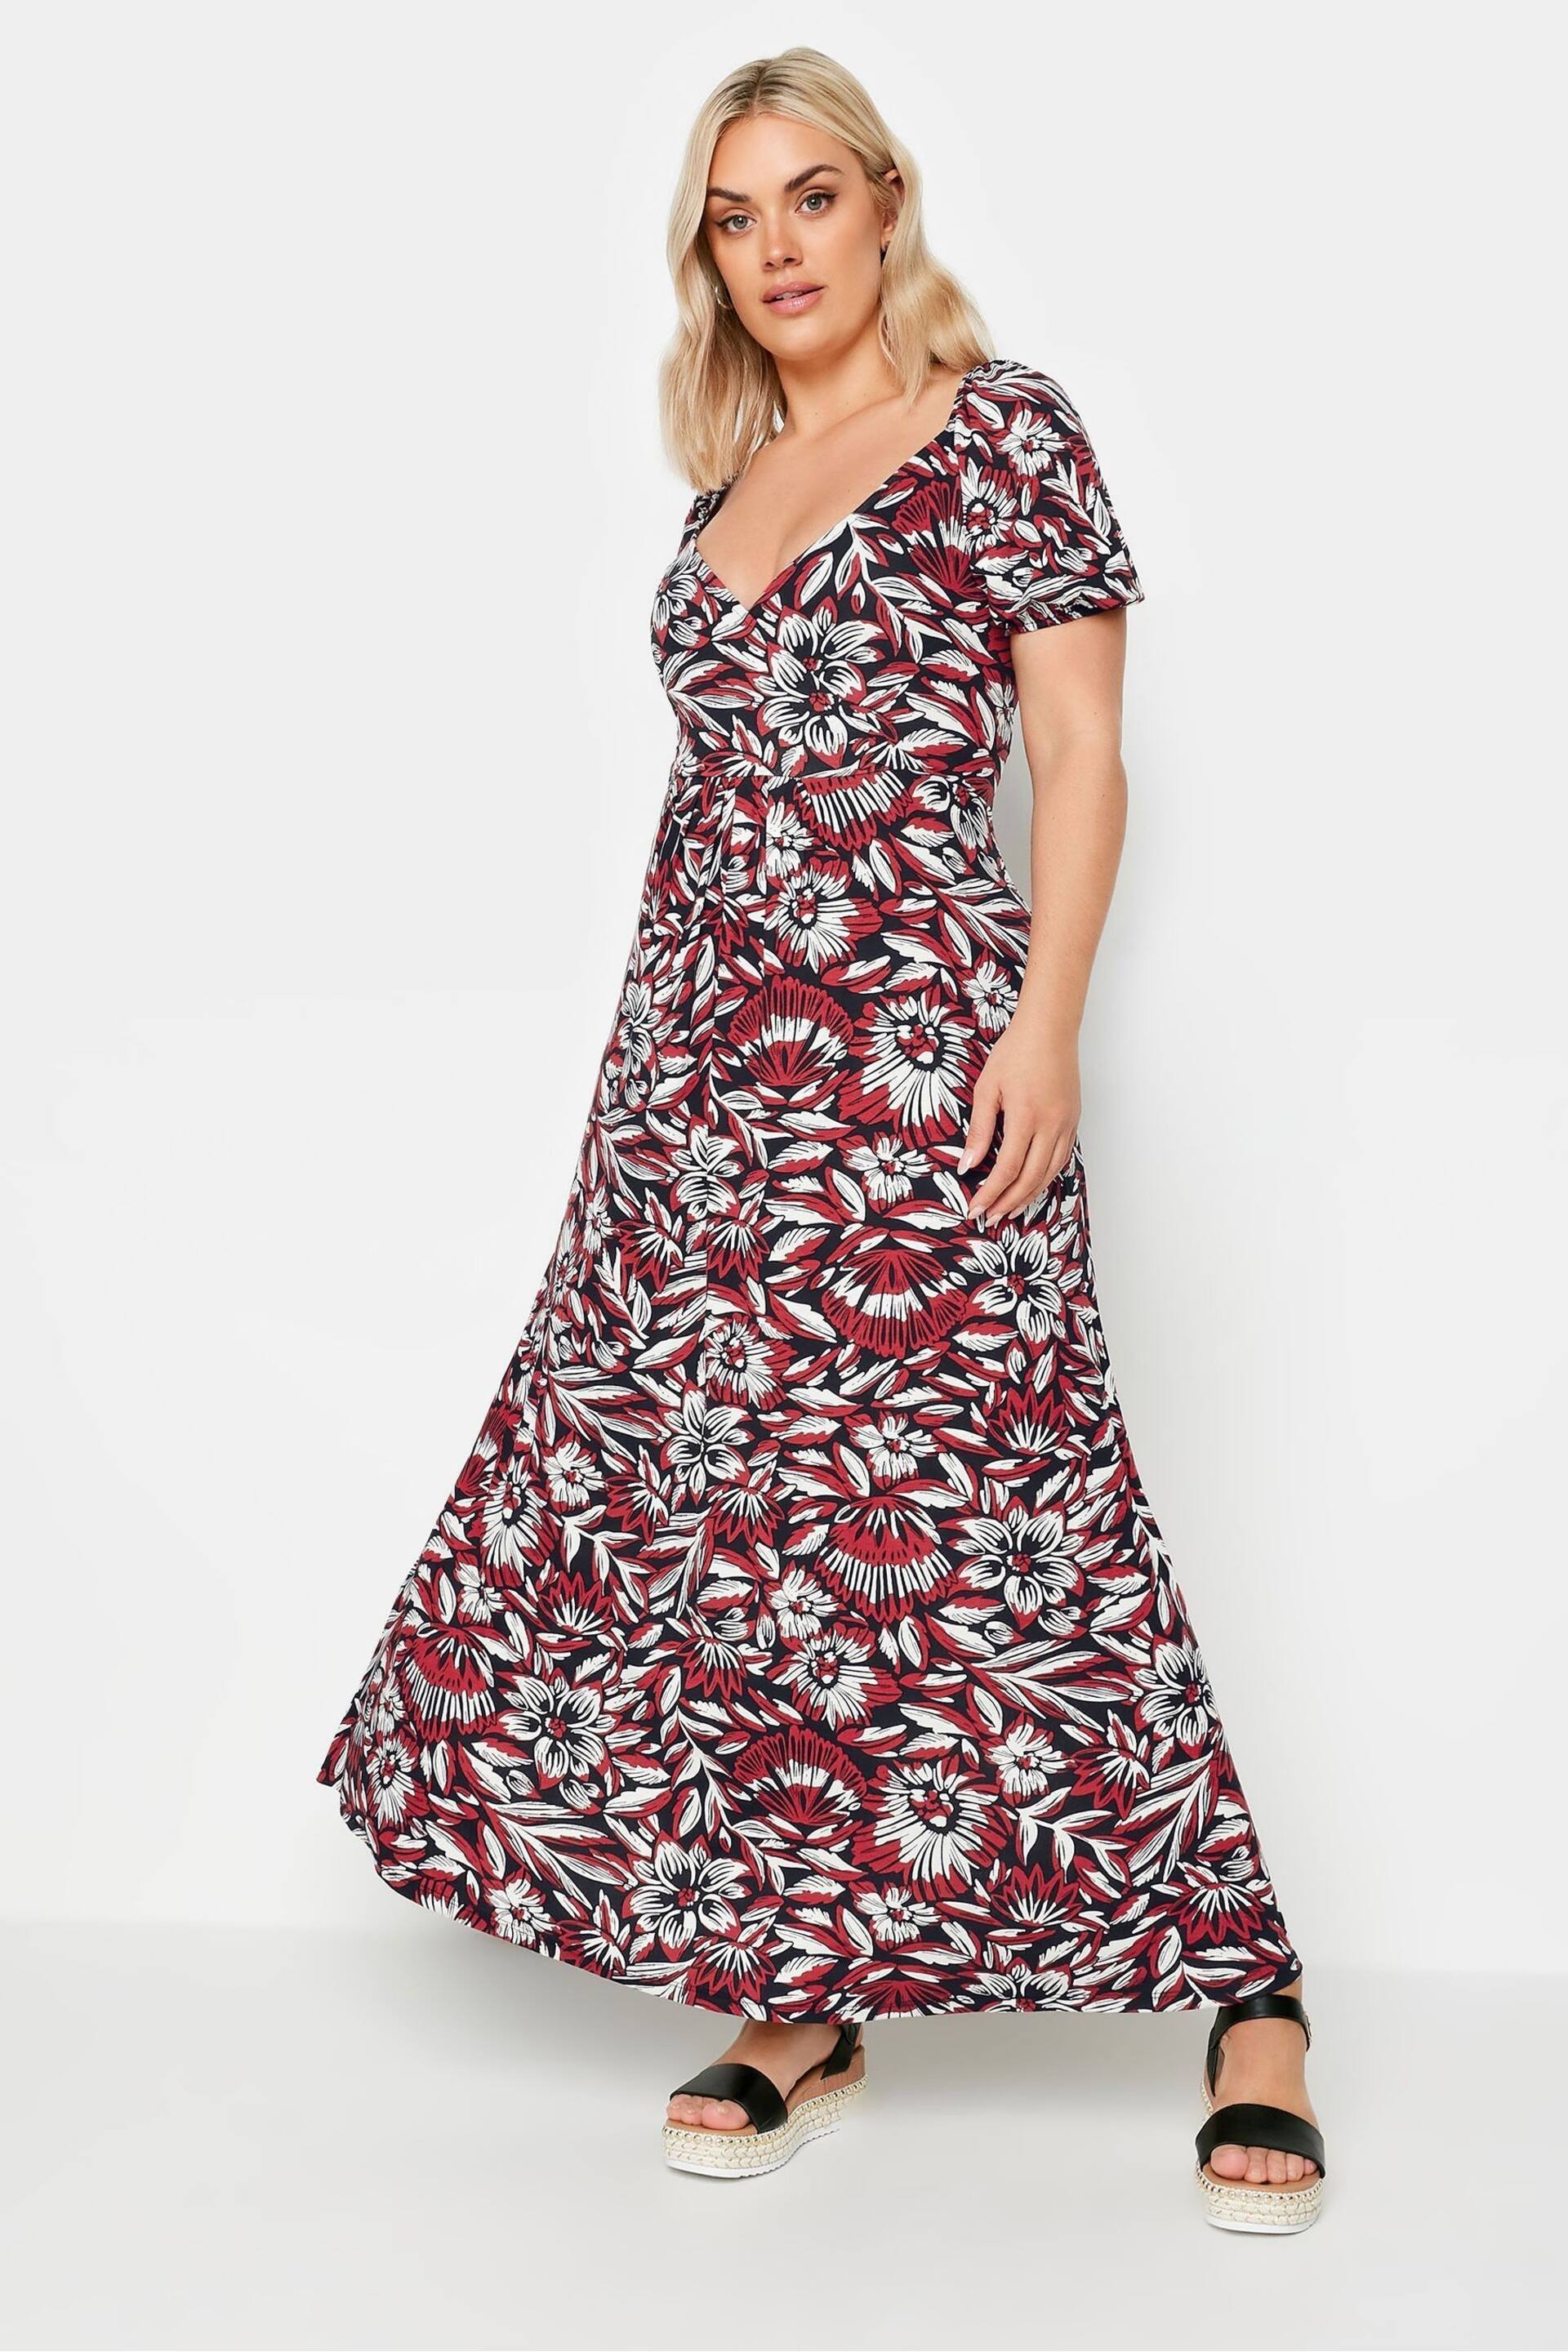 Yours Curve Red Floral Wrap Maxi Dress - Image 2 of 5